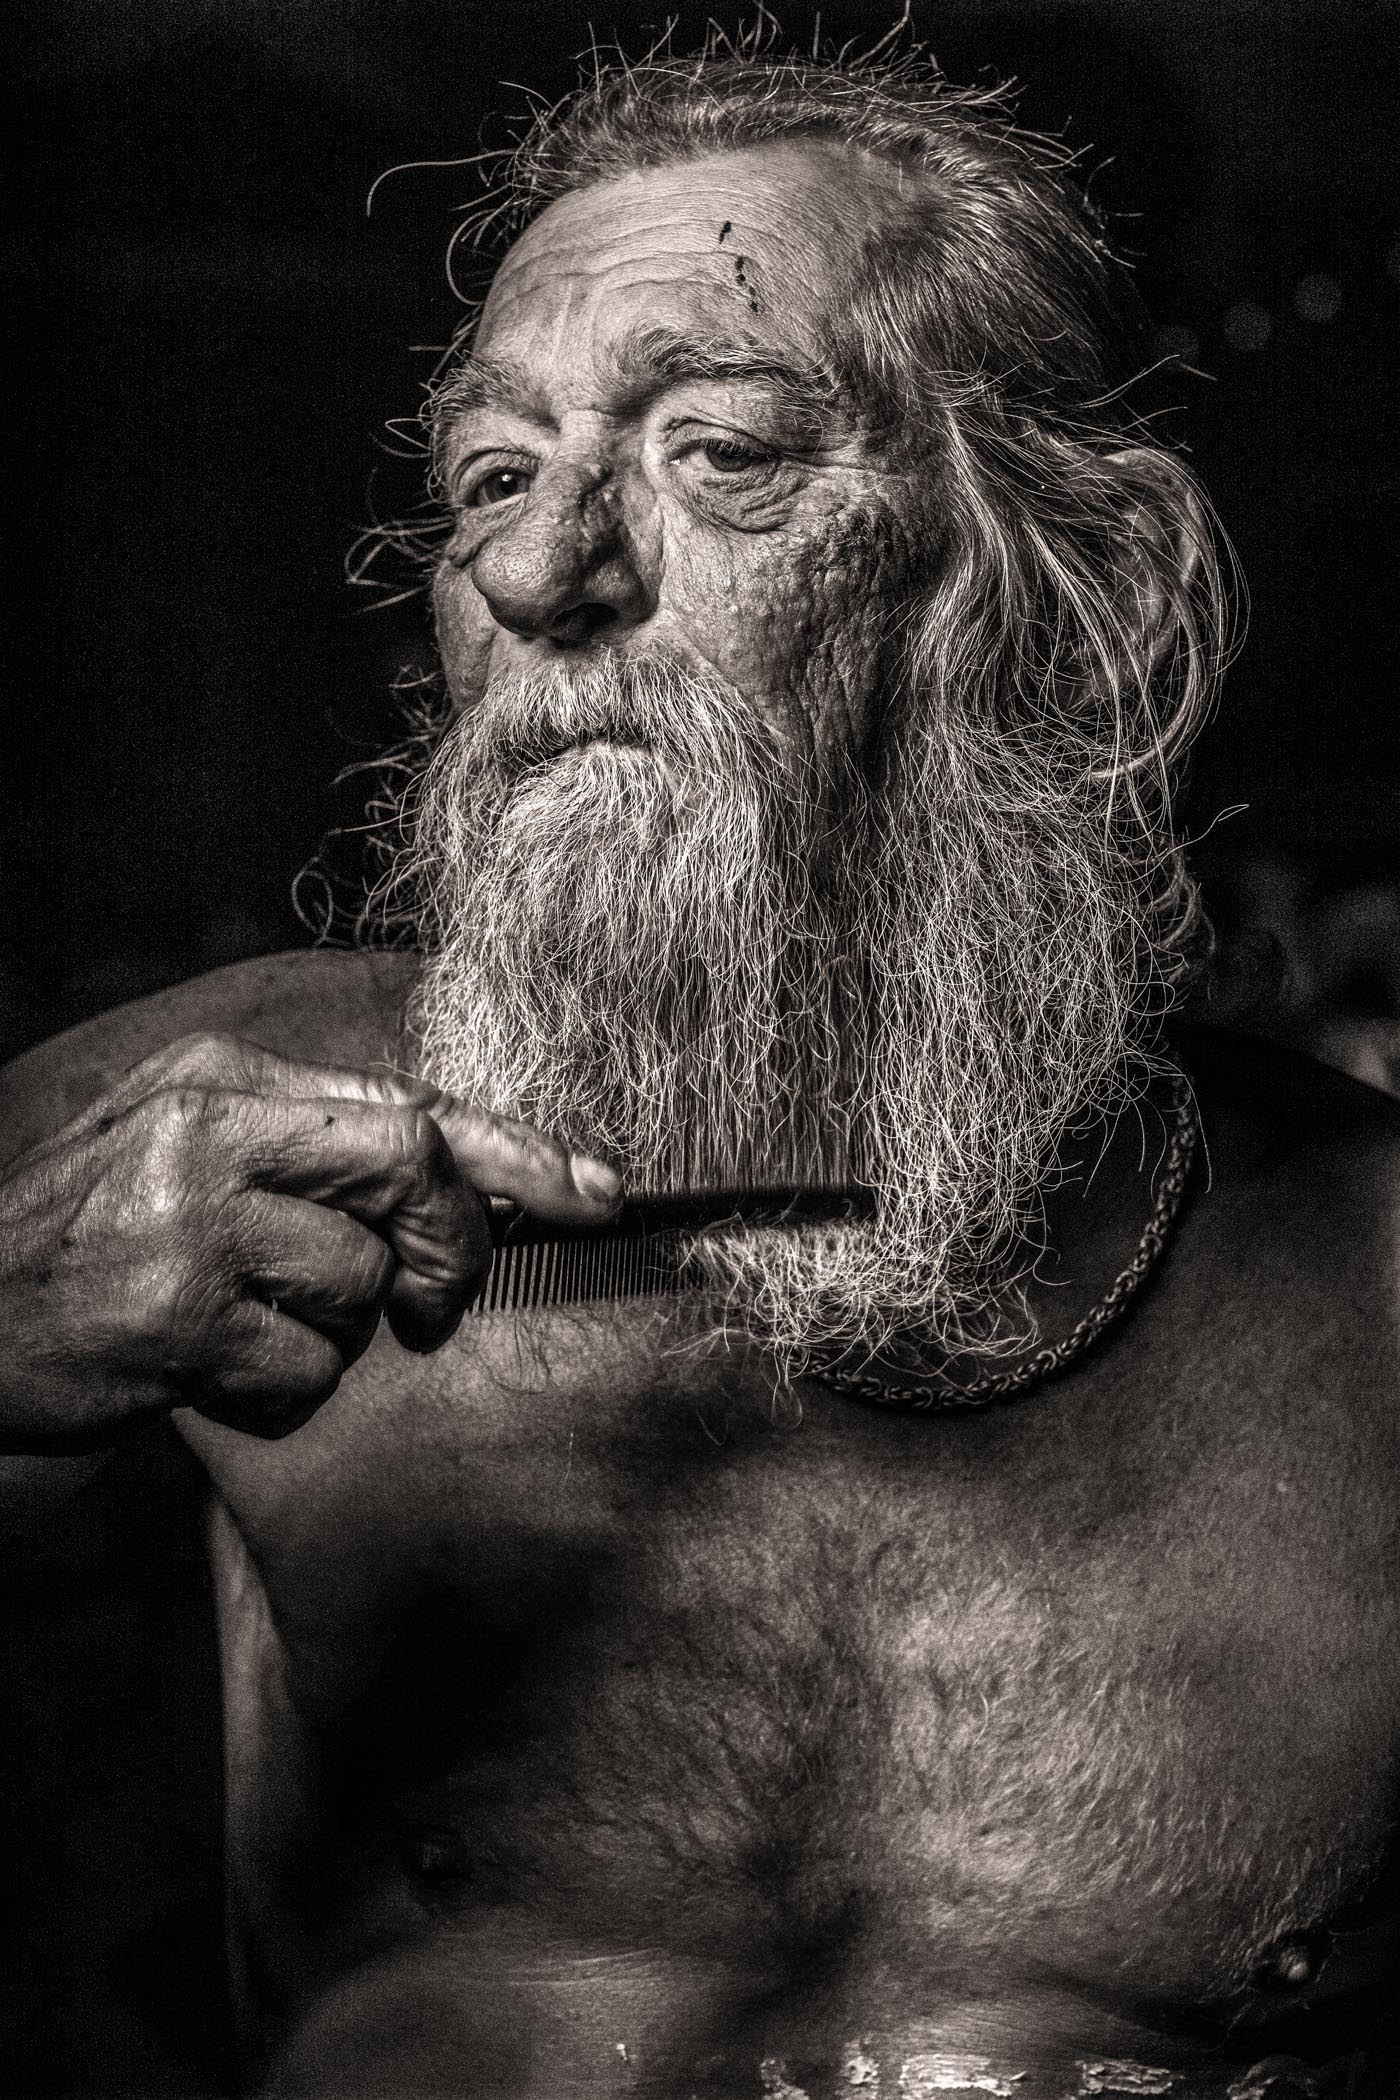 Photo of homeless man by photographer Martin Thaulow